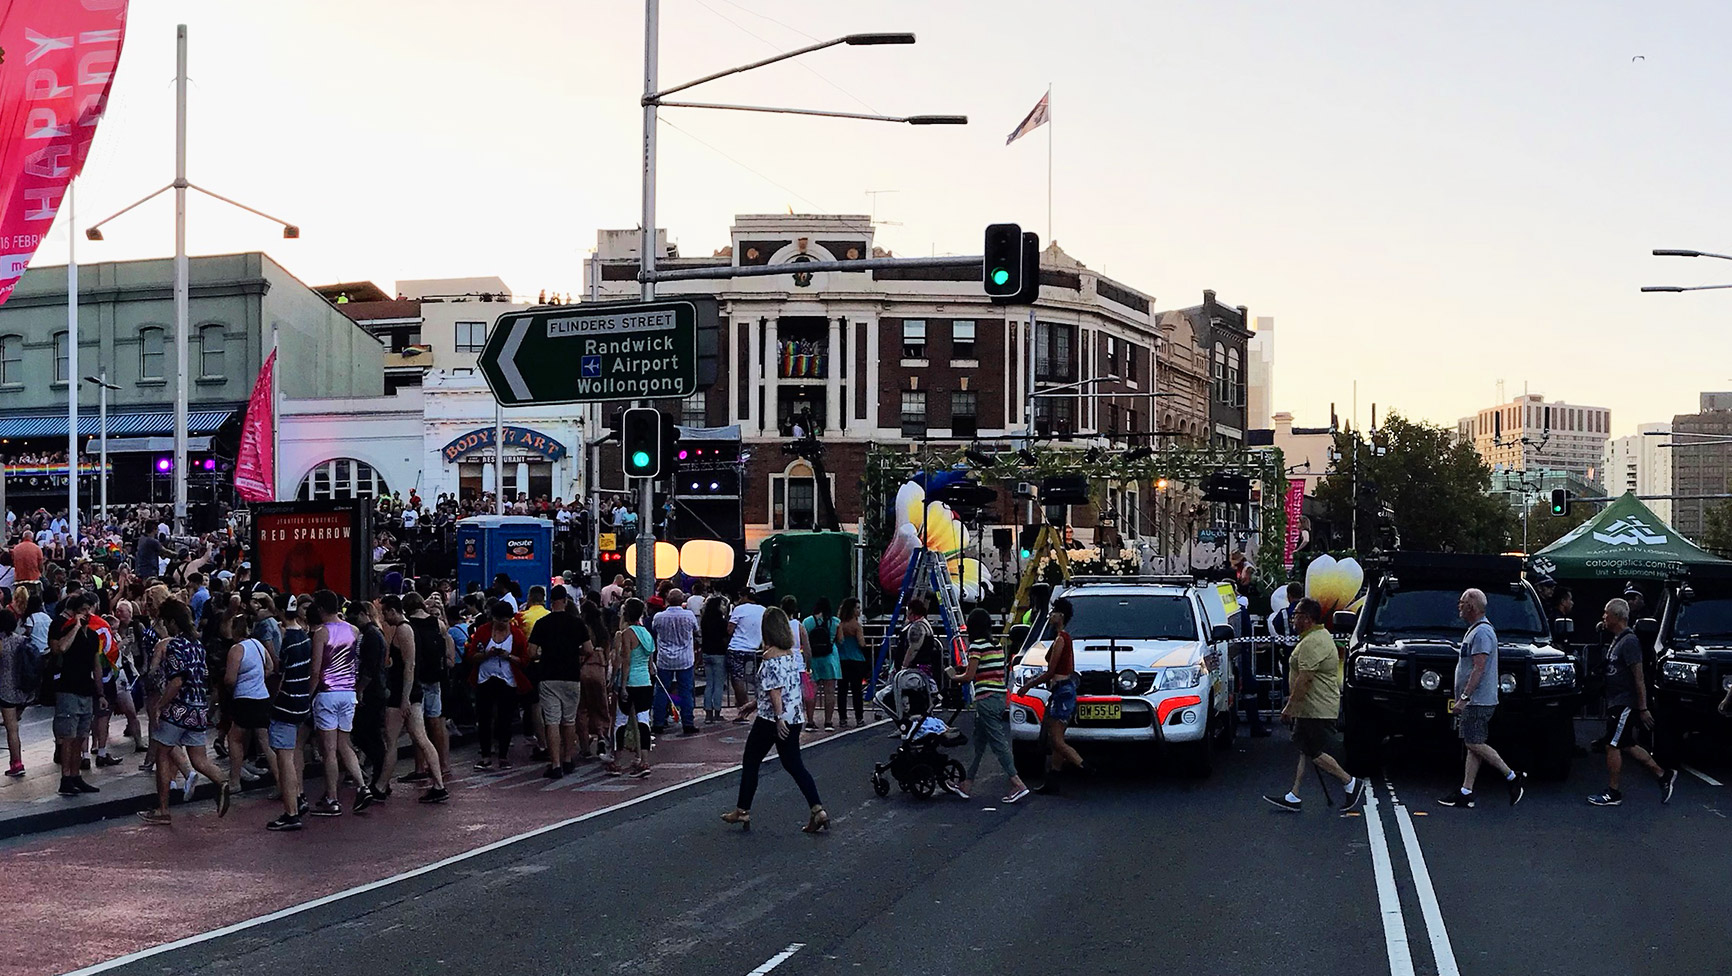 Crowd controlPictured: Sydney Gay and Lesbian Mardi Gras 2018 (CATO managed logistics for media teams and provided VIP trailers for the 2017 and 2018 events)